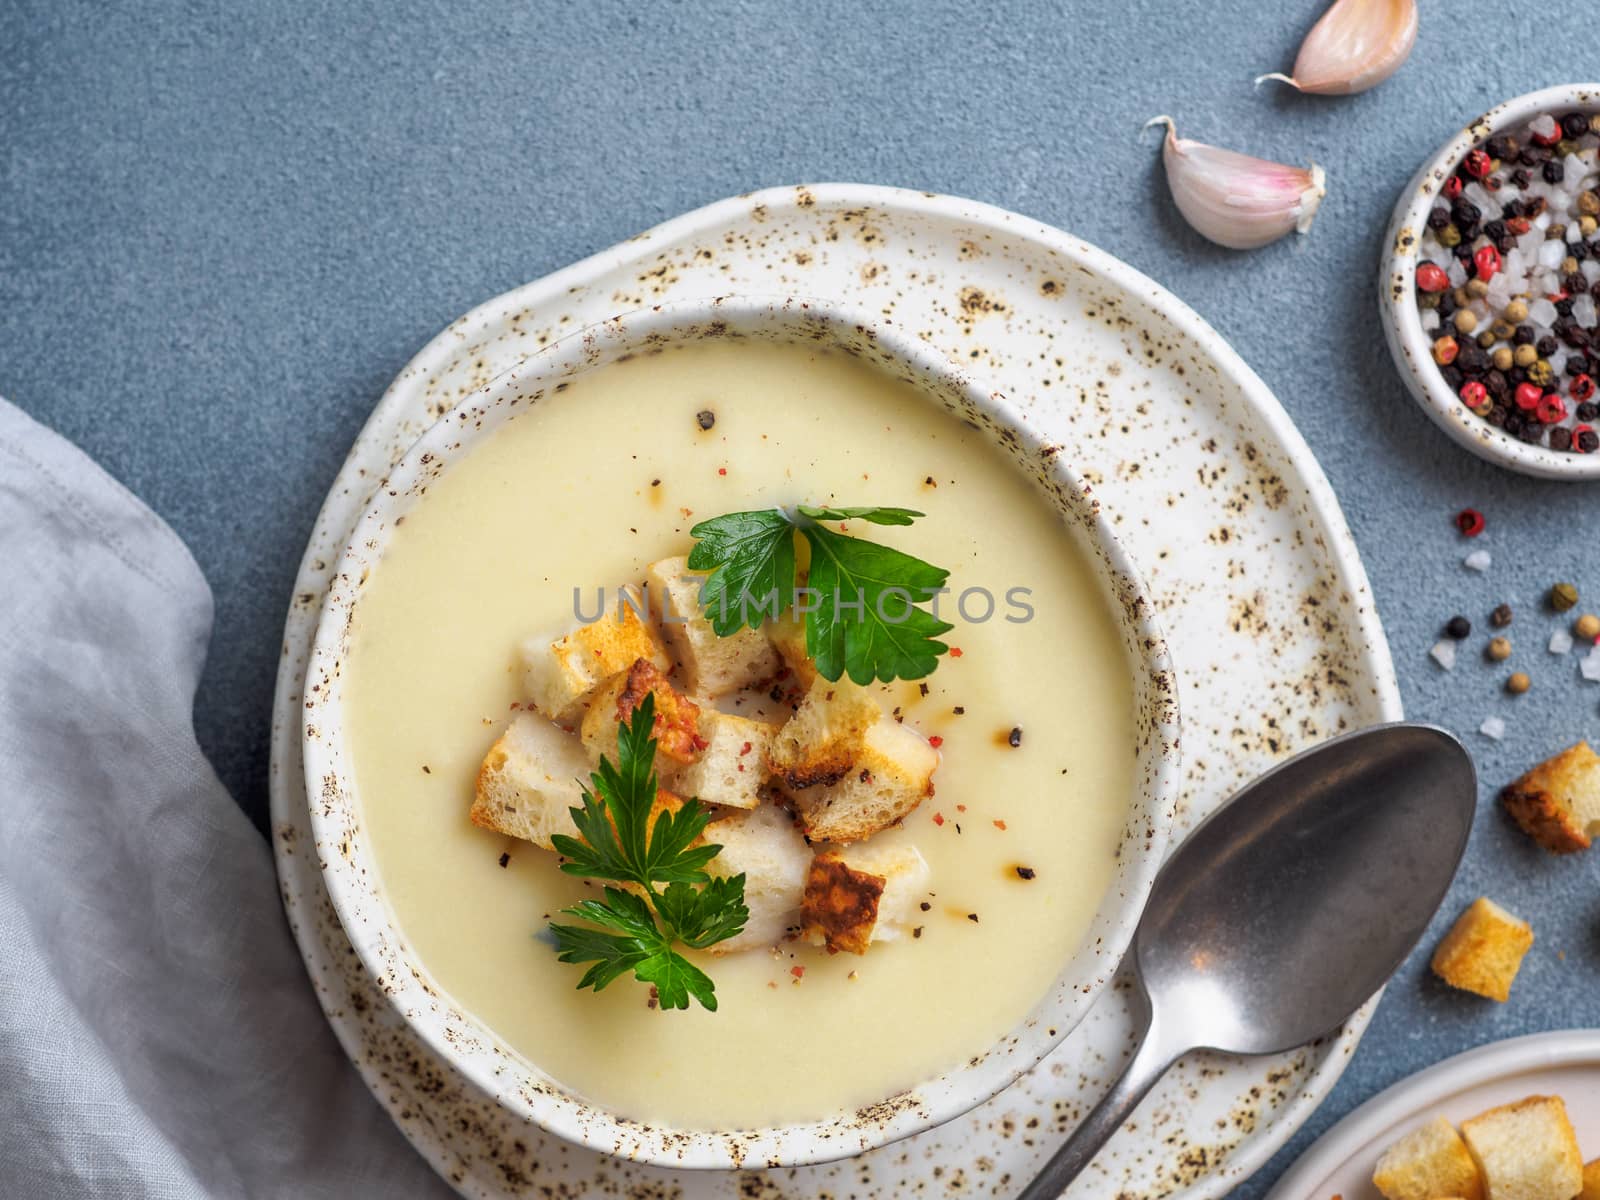 cauliflower potato soup puree on stone background, Creamy cauliflower soup with toasted bread croutons. Vegetarian healthy food concept. Ideas and recipes for winter meal. Top view flat lay.Copy space